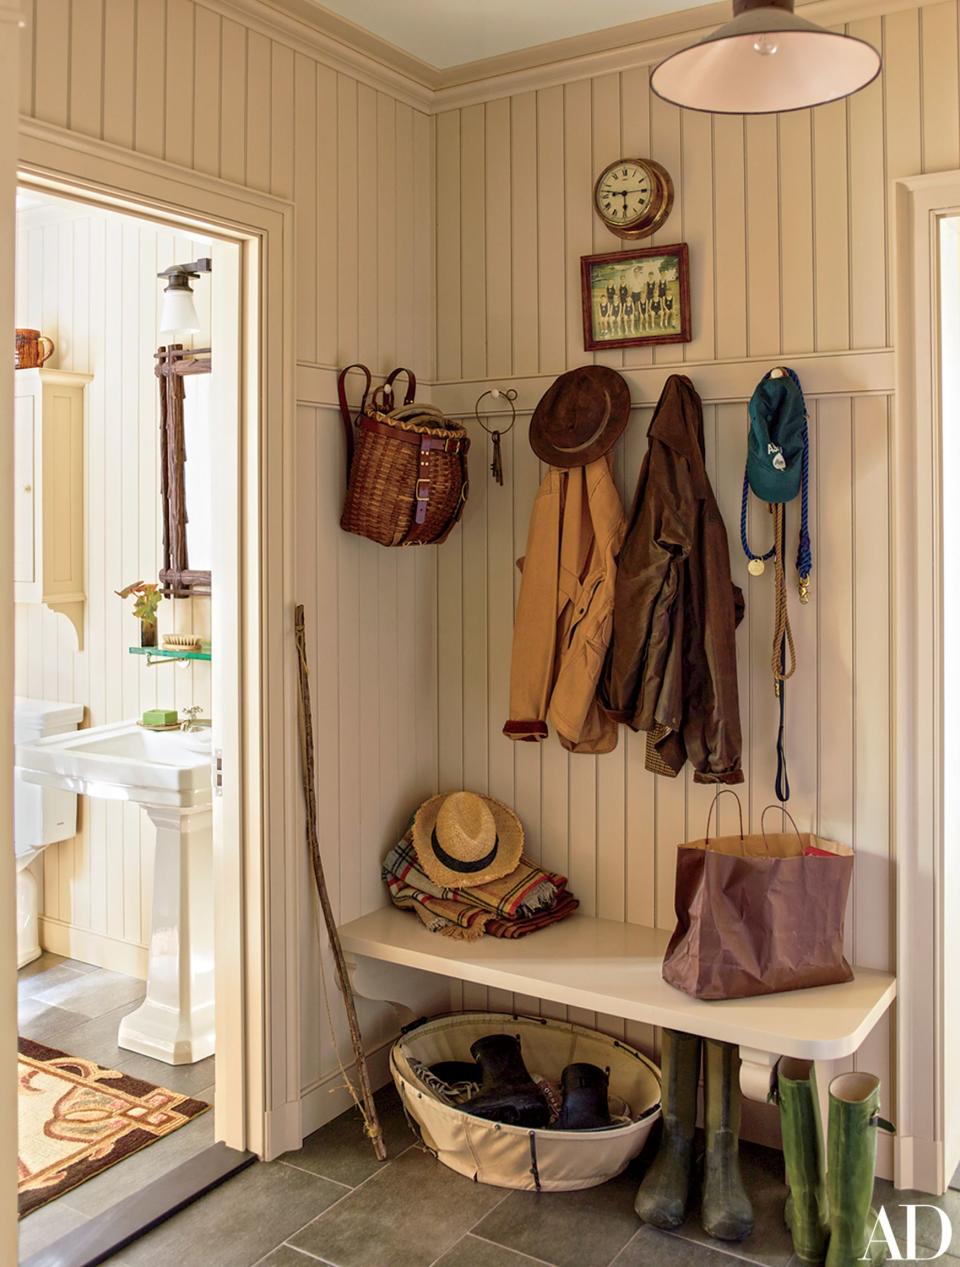 The design team at G.P. Schafer Architect added beadboard paneling to the mudroom of a Lake Placid, New York, home.